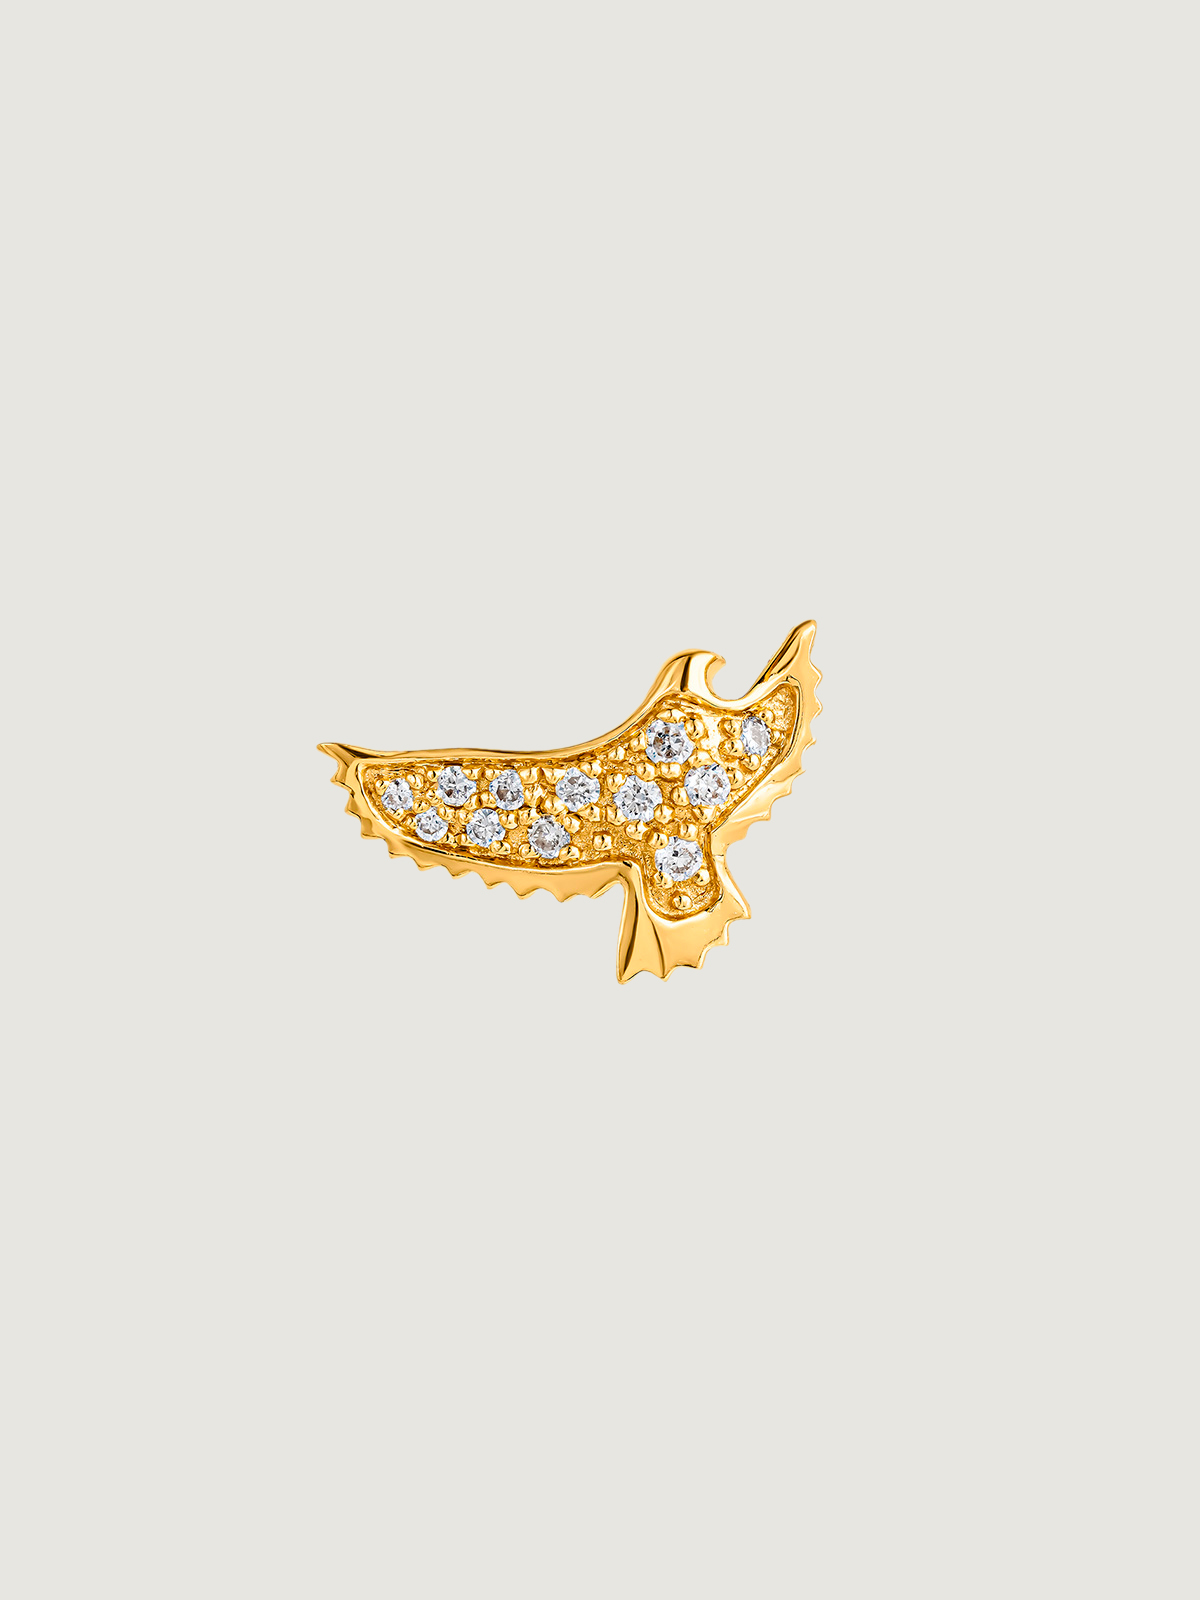 Individual 18K yellow gold earring in the shape of an eagle with diamonds.